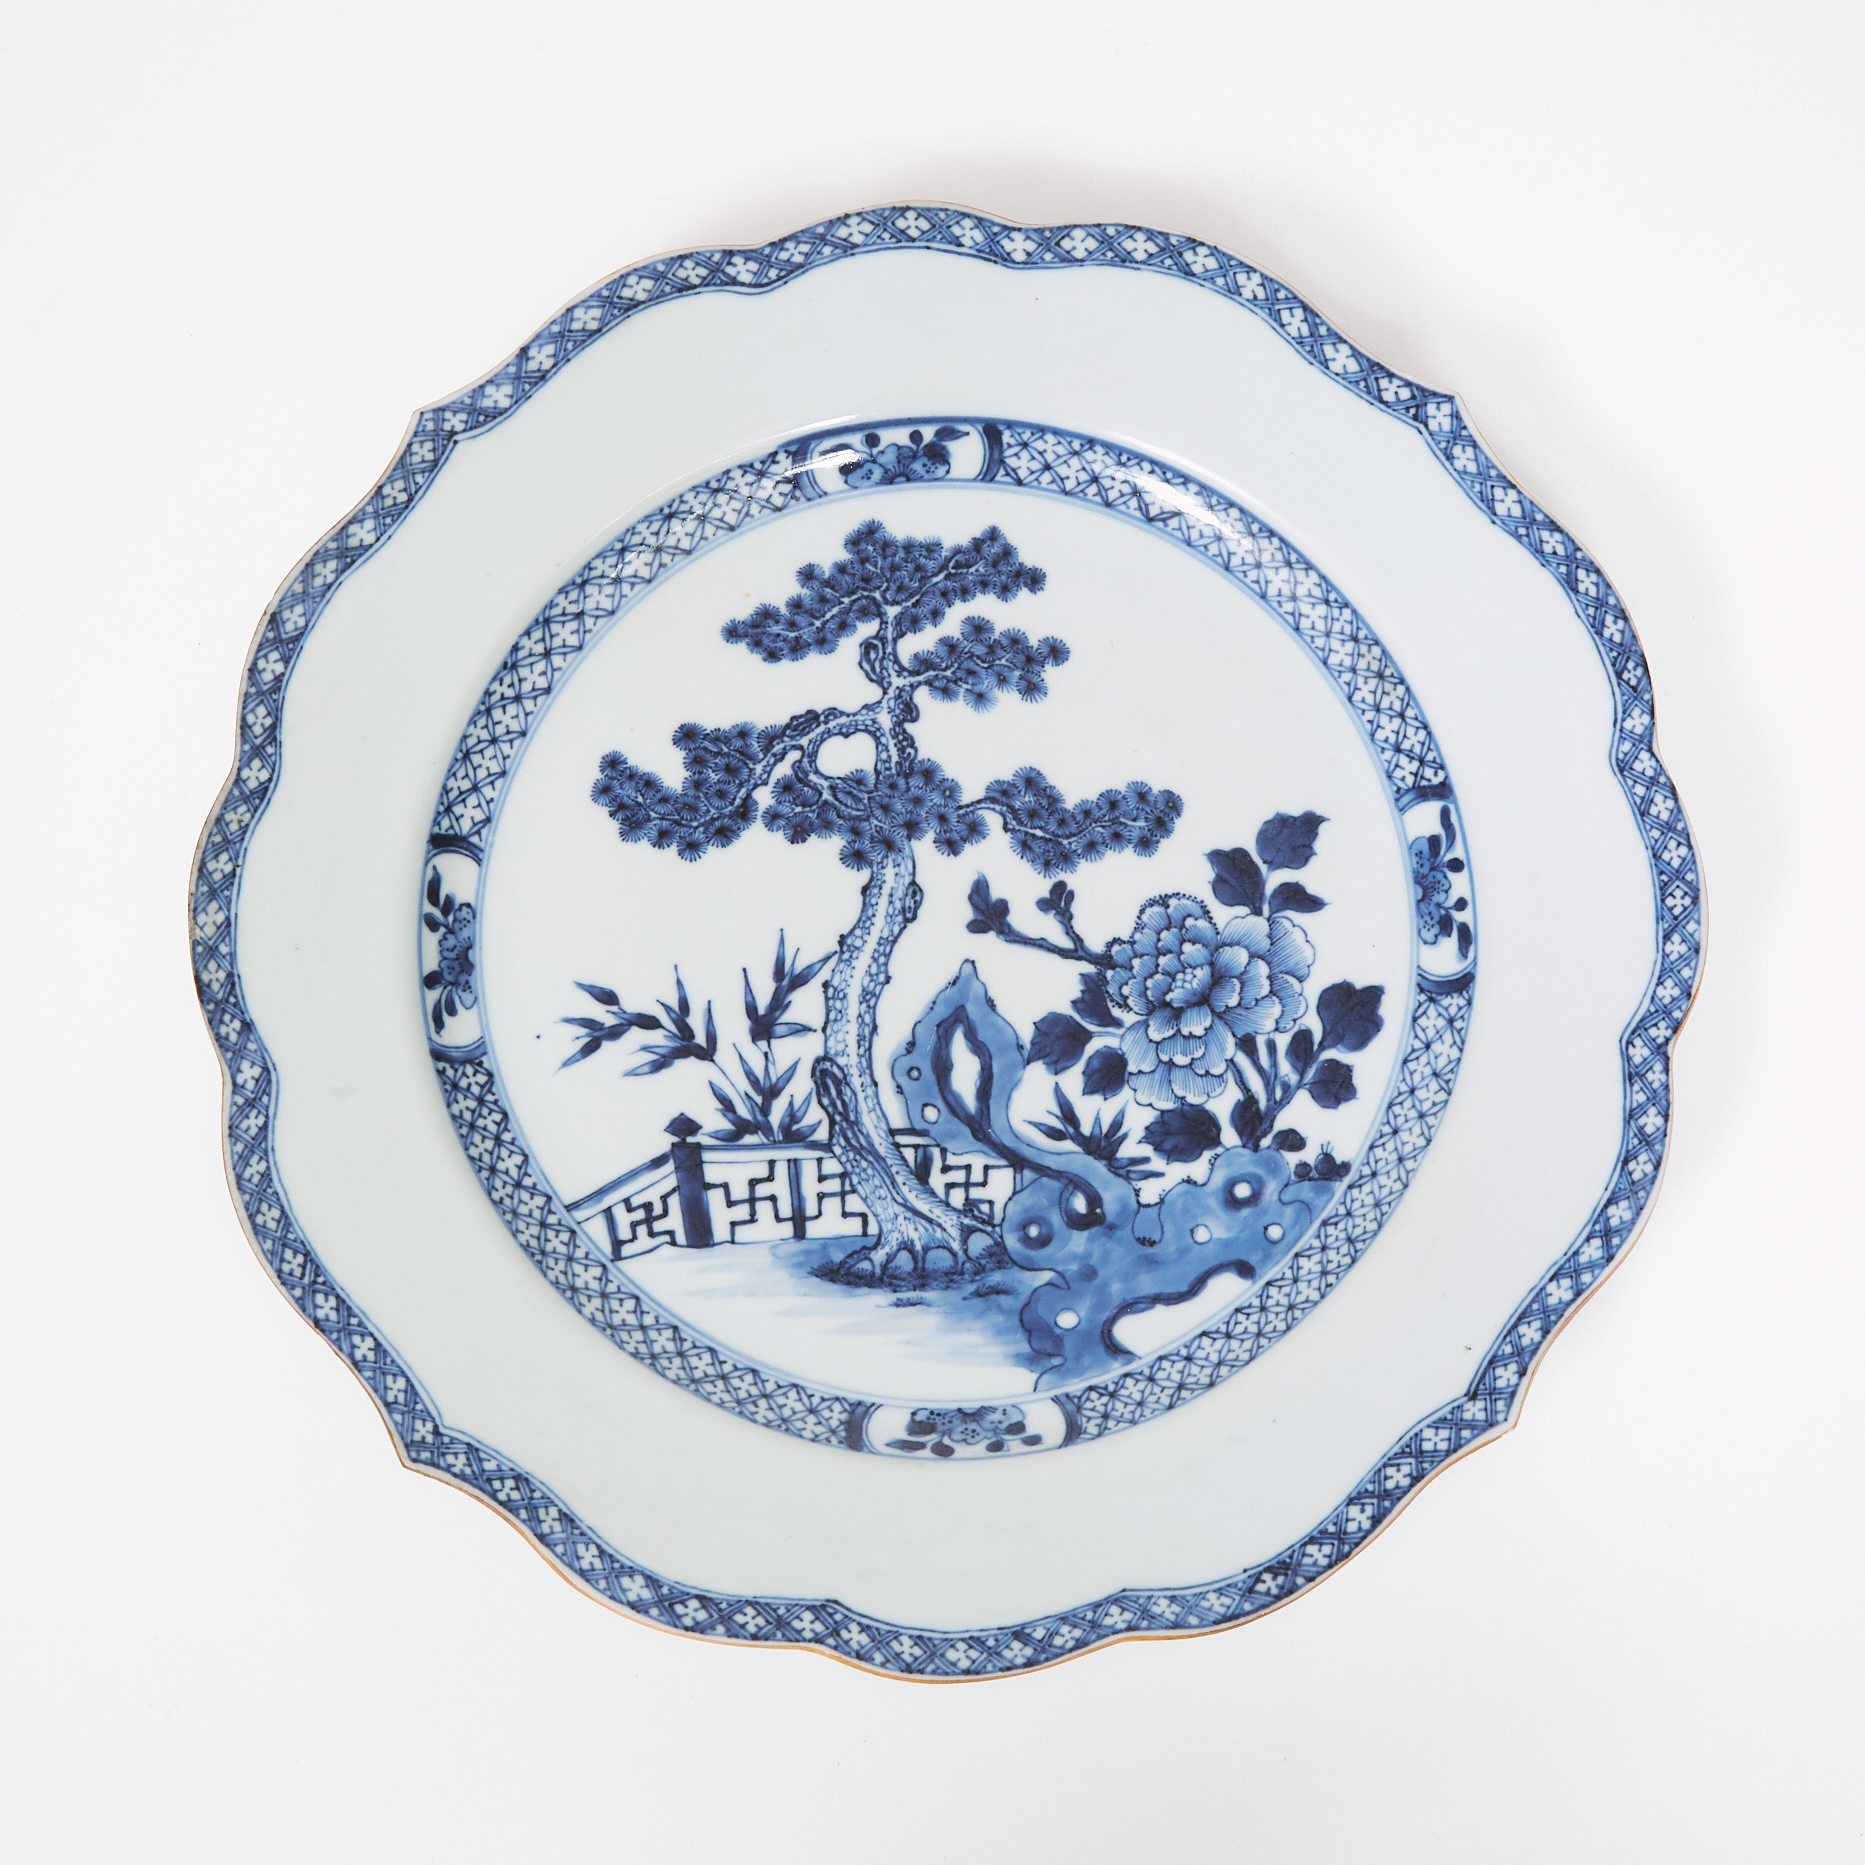 A Large Blue and White 'Pine Tree' Barbed-Rim Plate, 18th Century